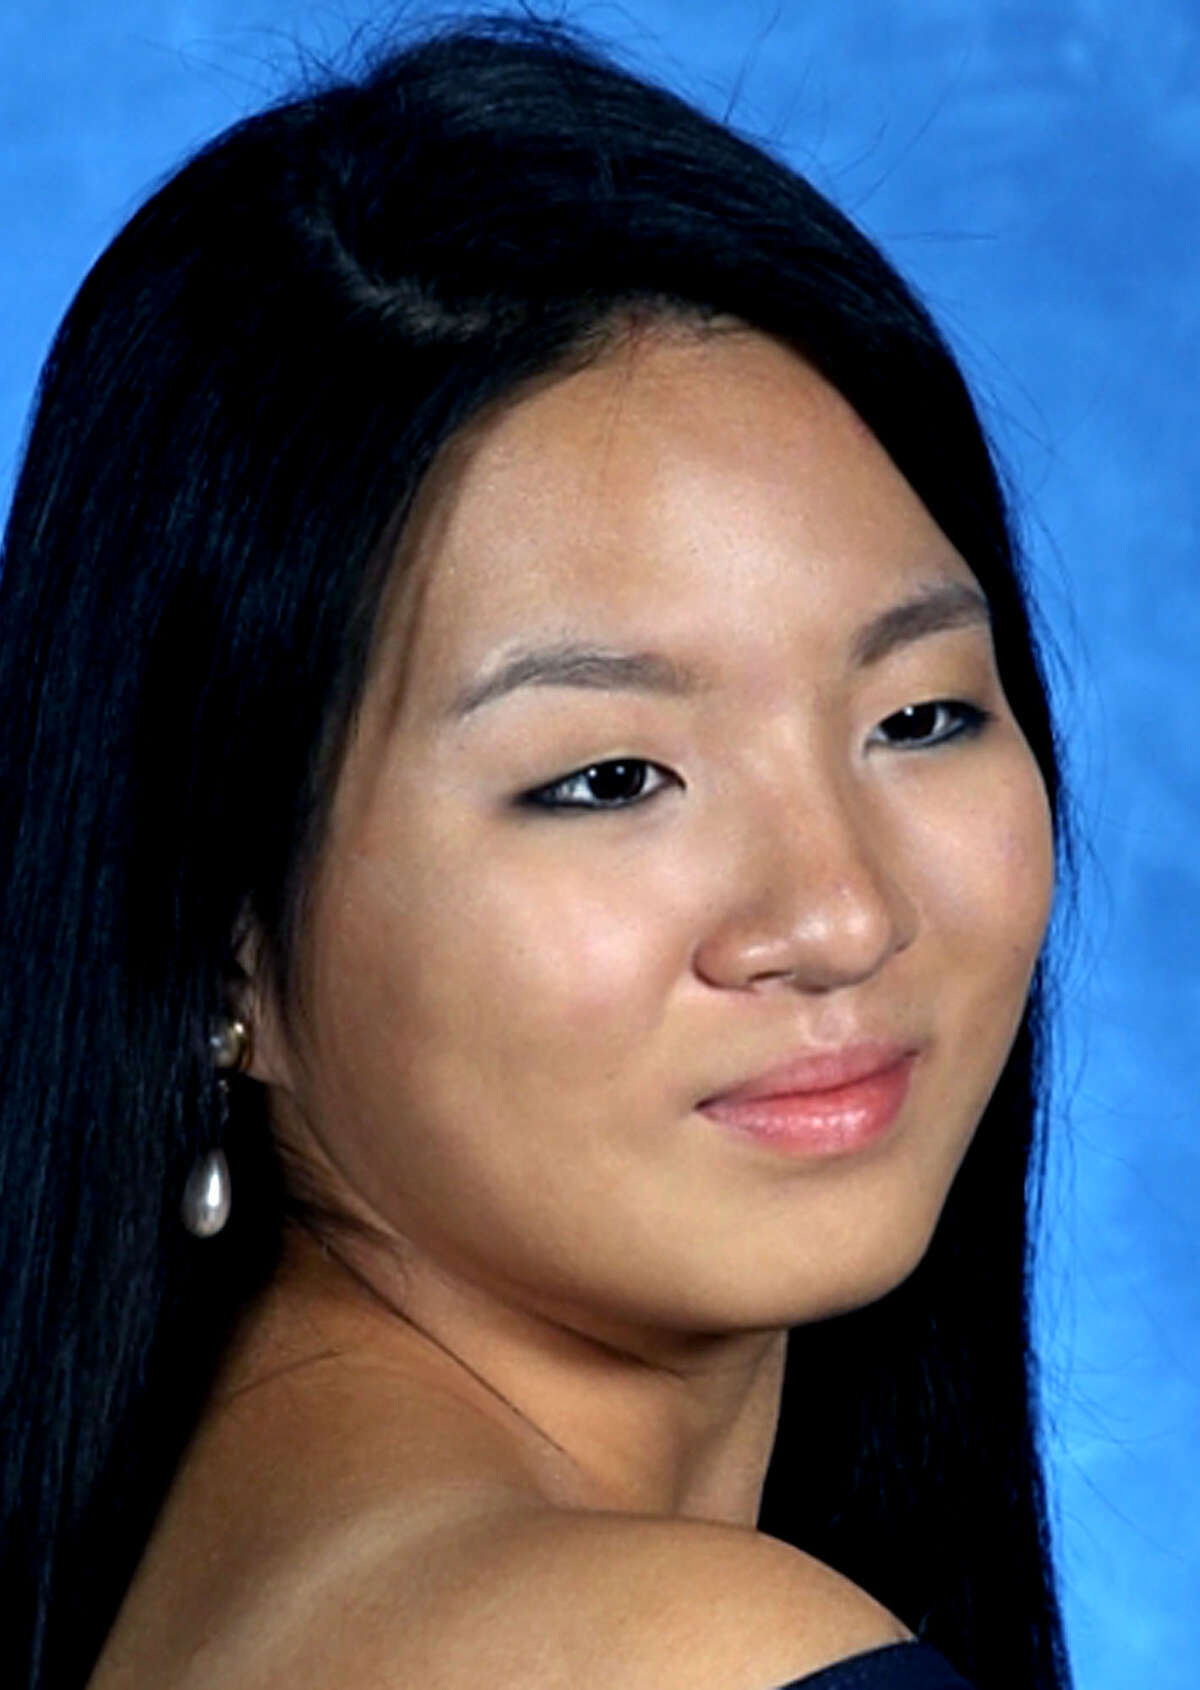 Annie Mao, valedictorian for New Milford High School Class of 2012